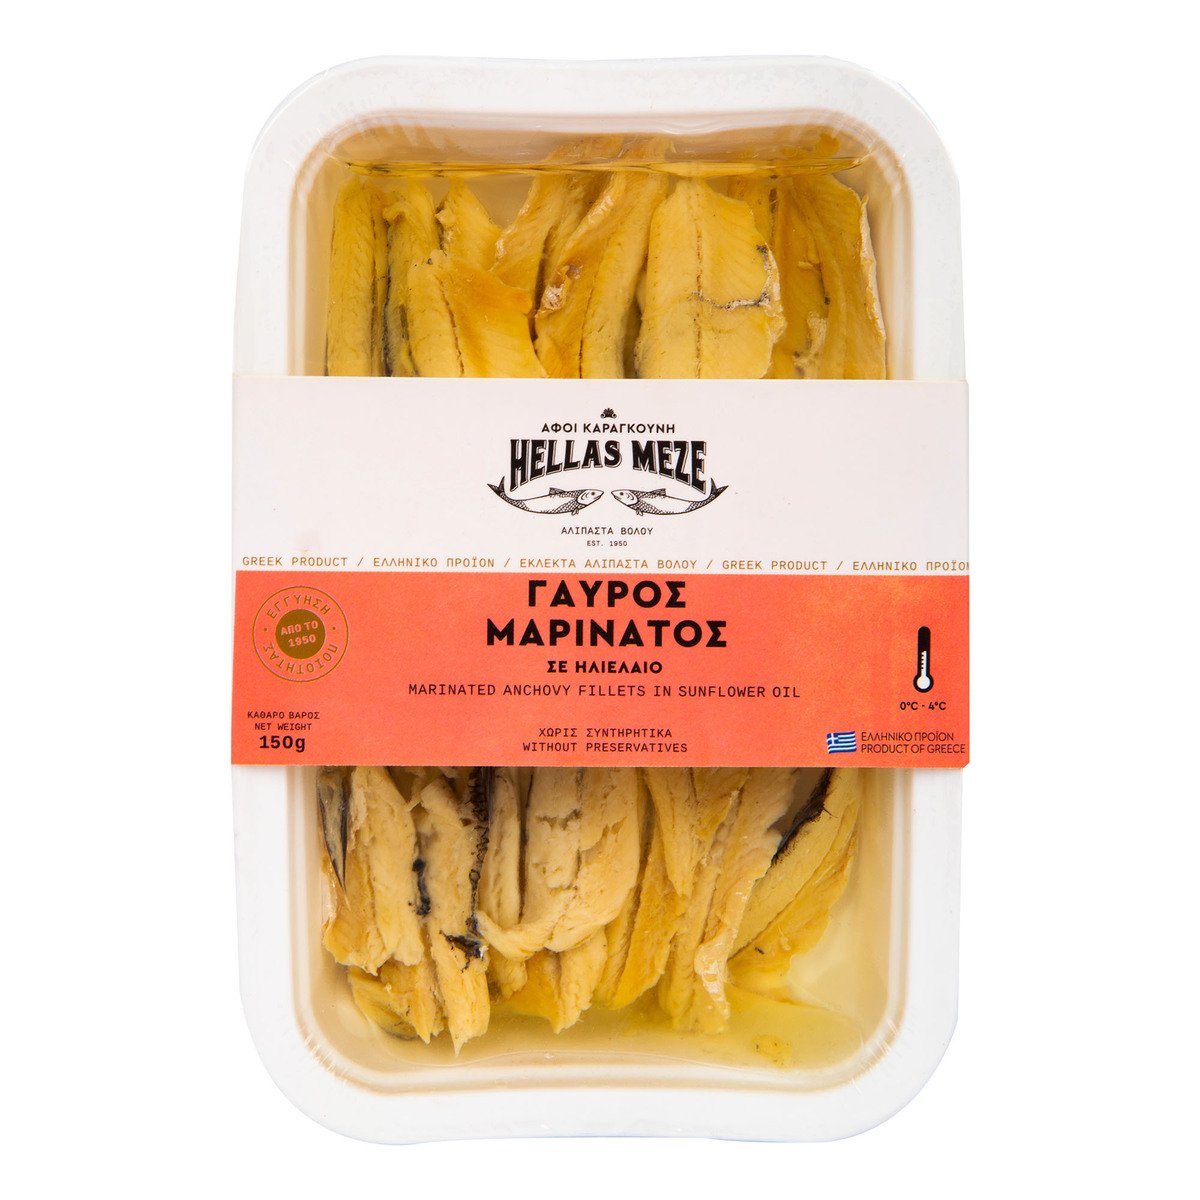 Hellas Meze Marinated Anchovy Fillets In Sunflower Oil 150 g